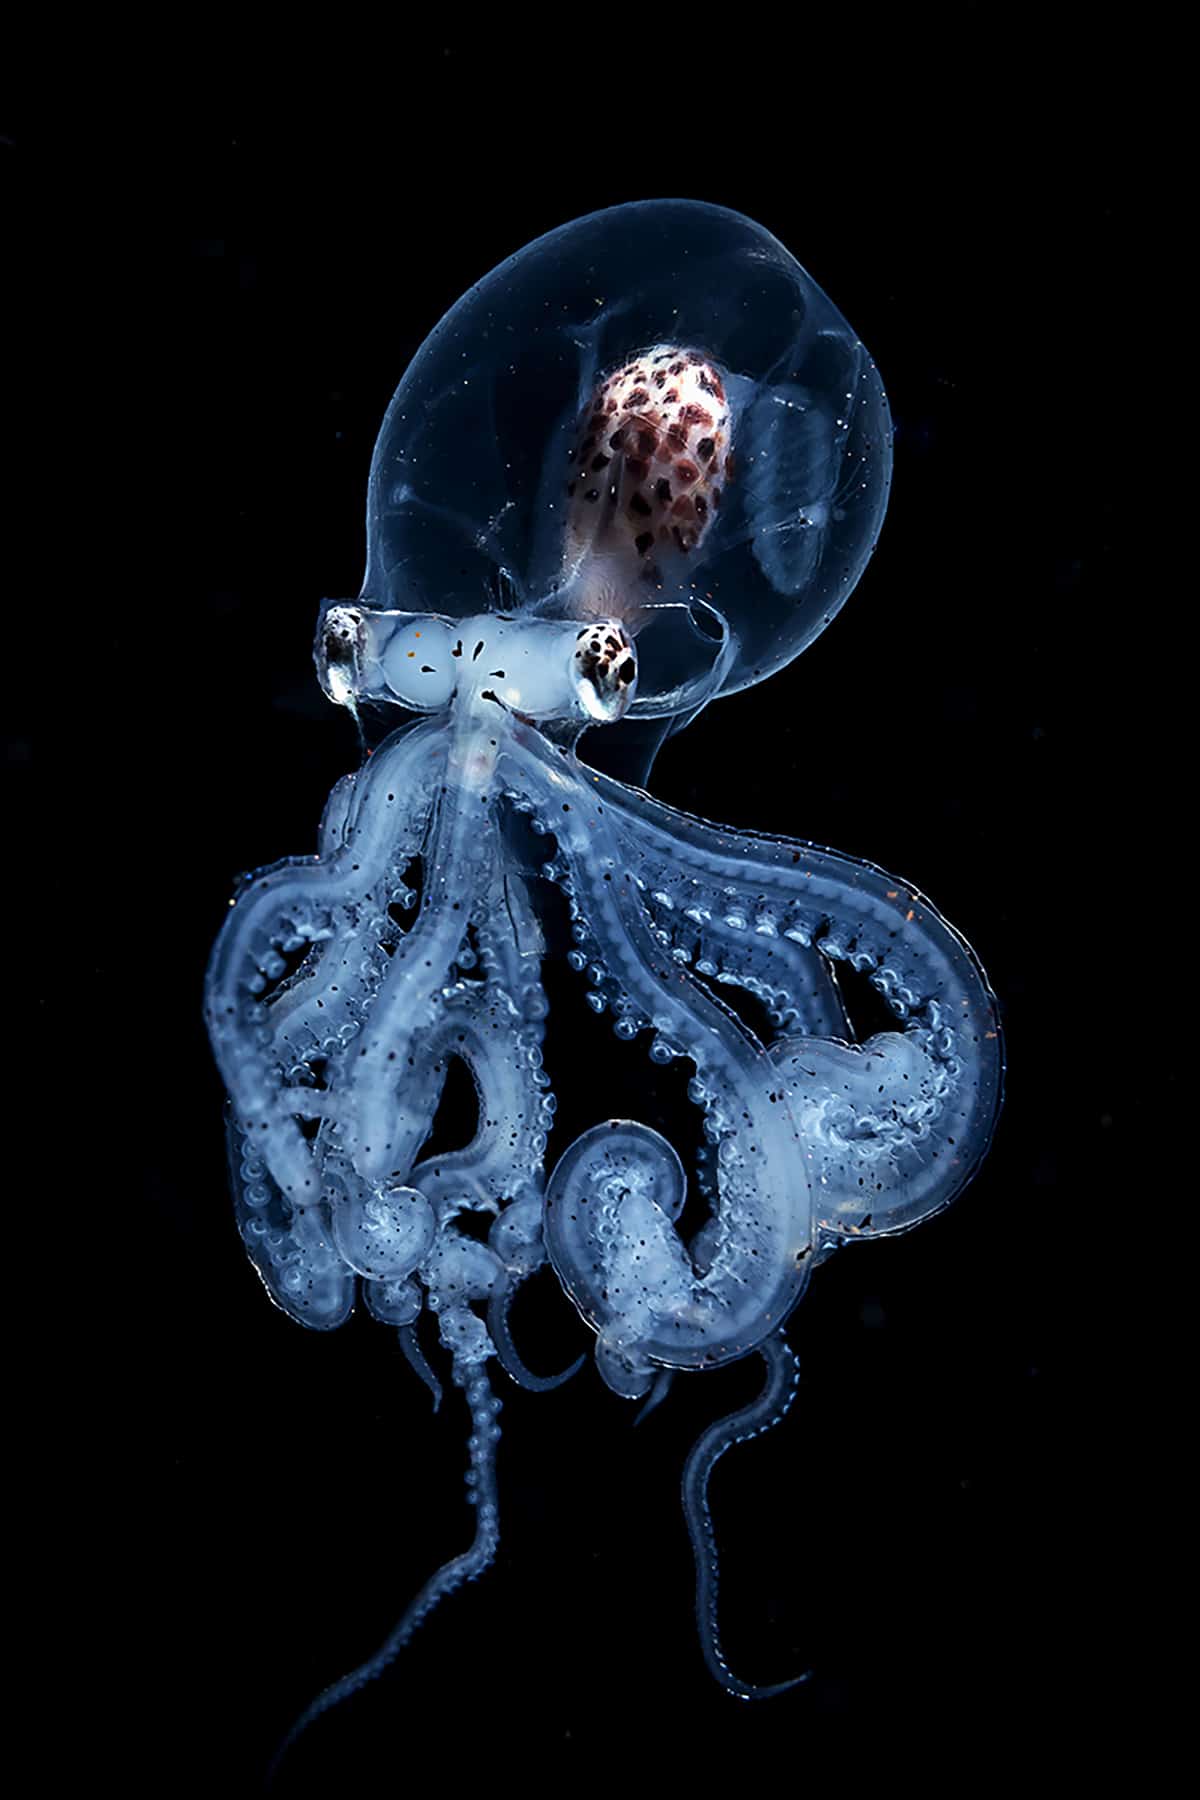 Rare Octopus With Transparent Head Caught by Blackwater Photographer